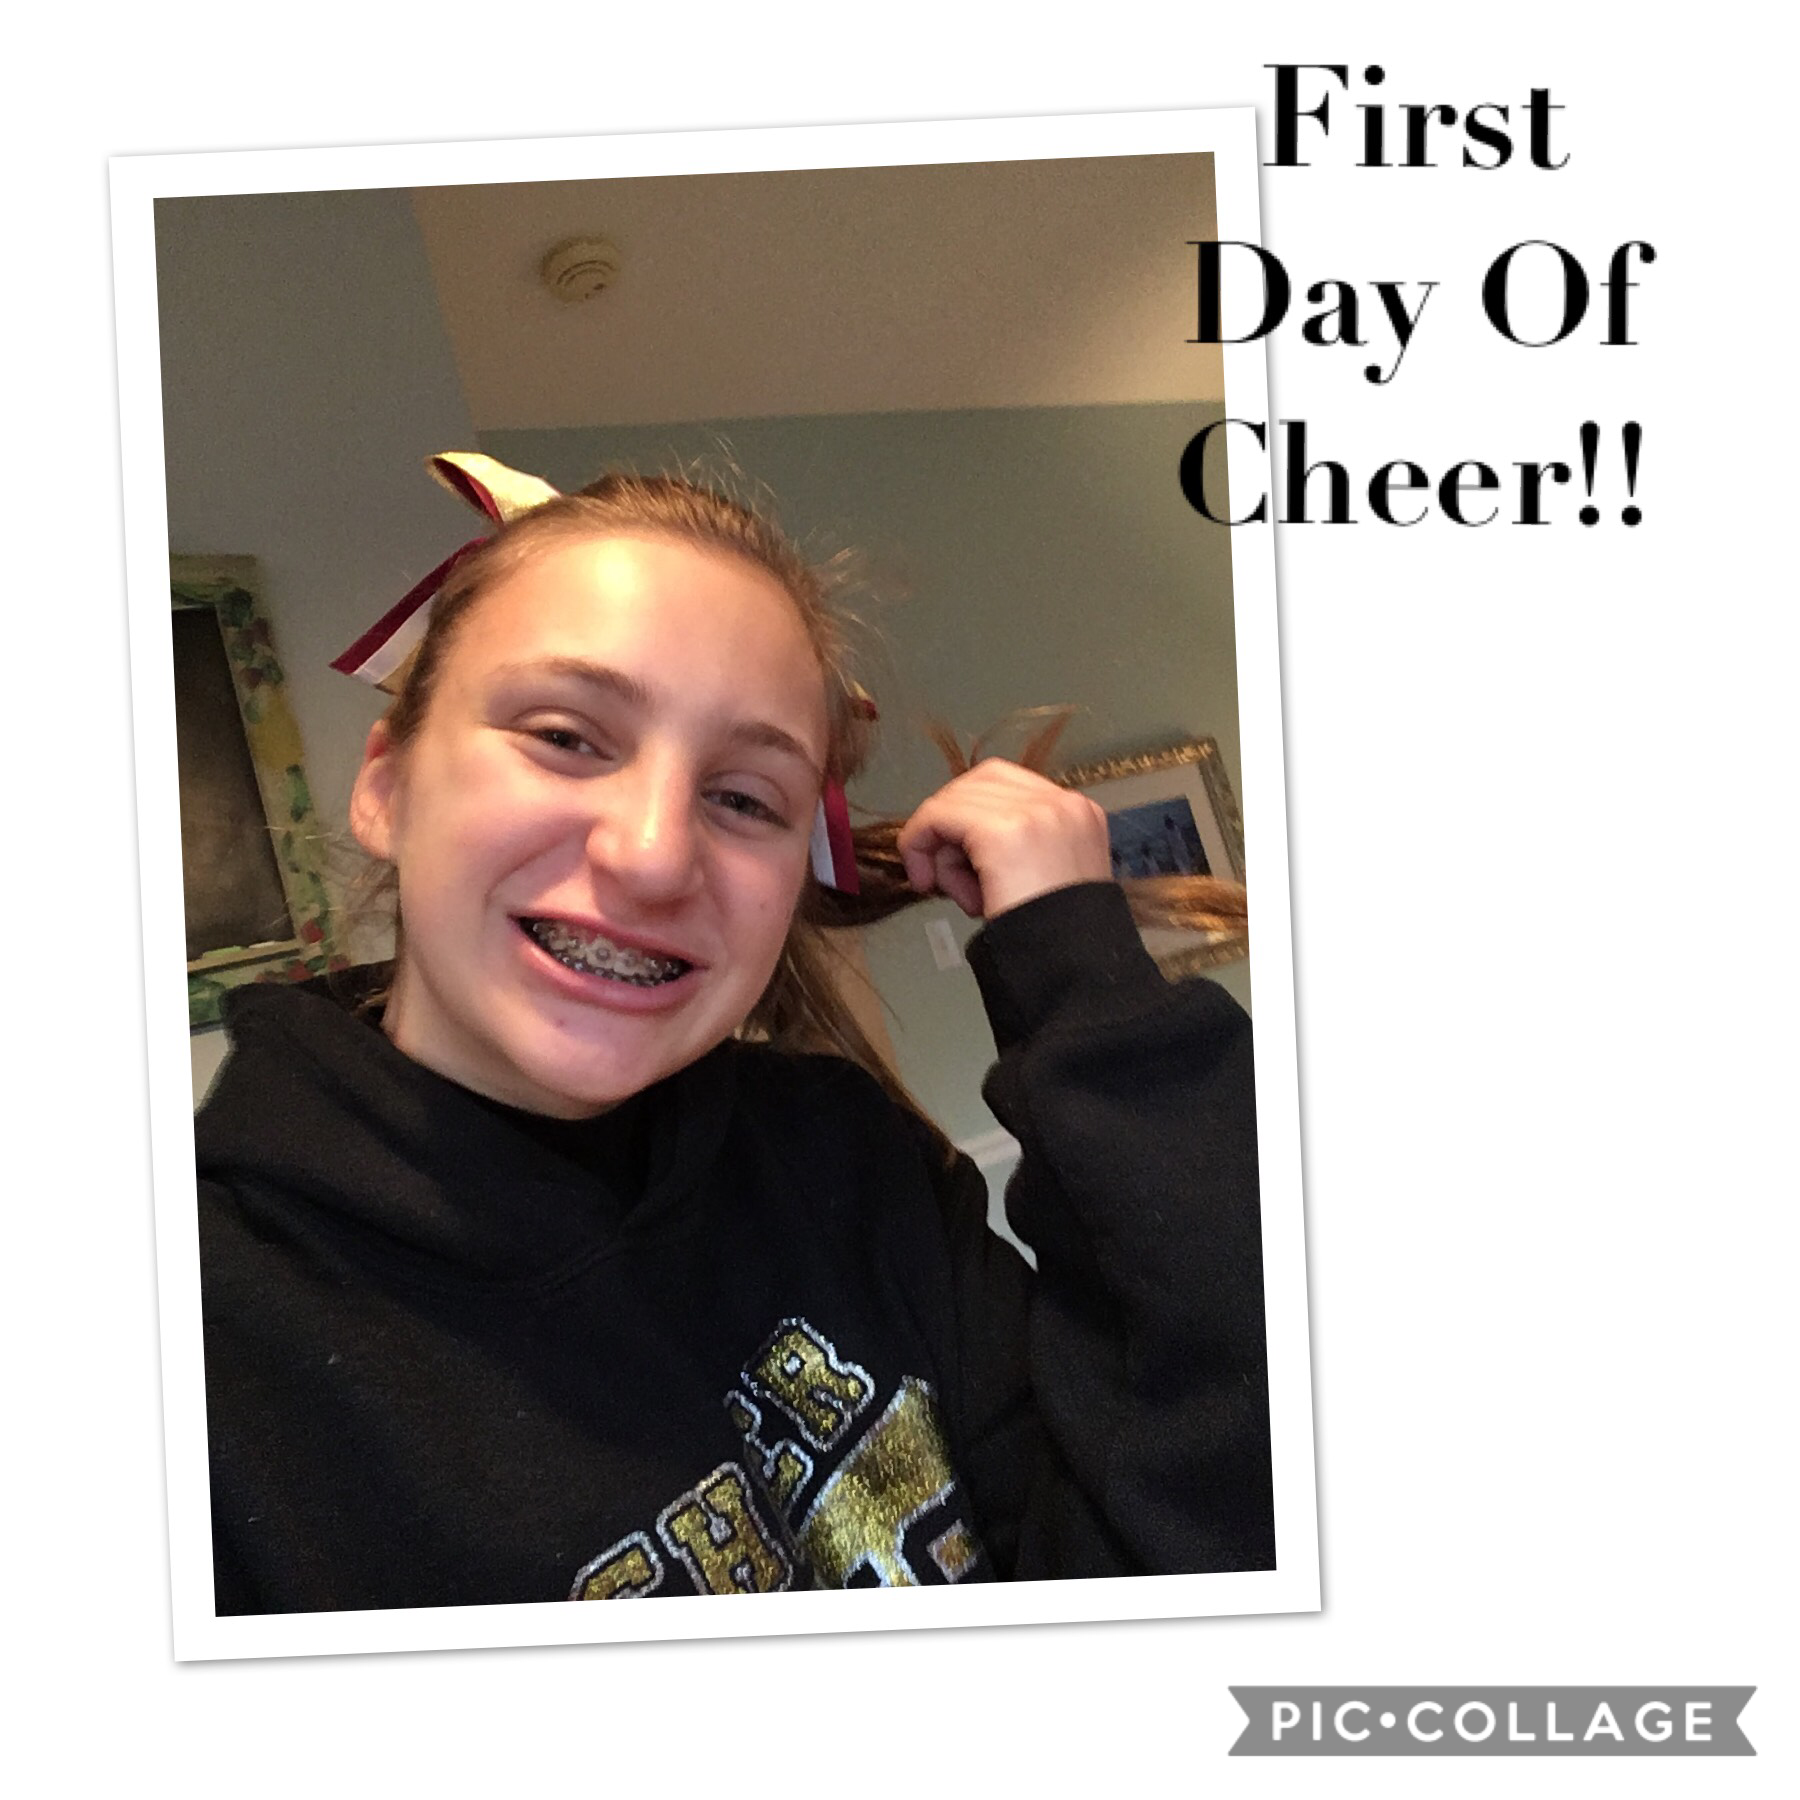 First Day Of Cheer!!